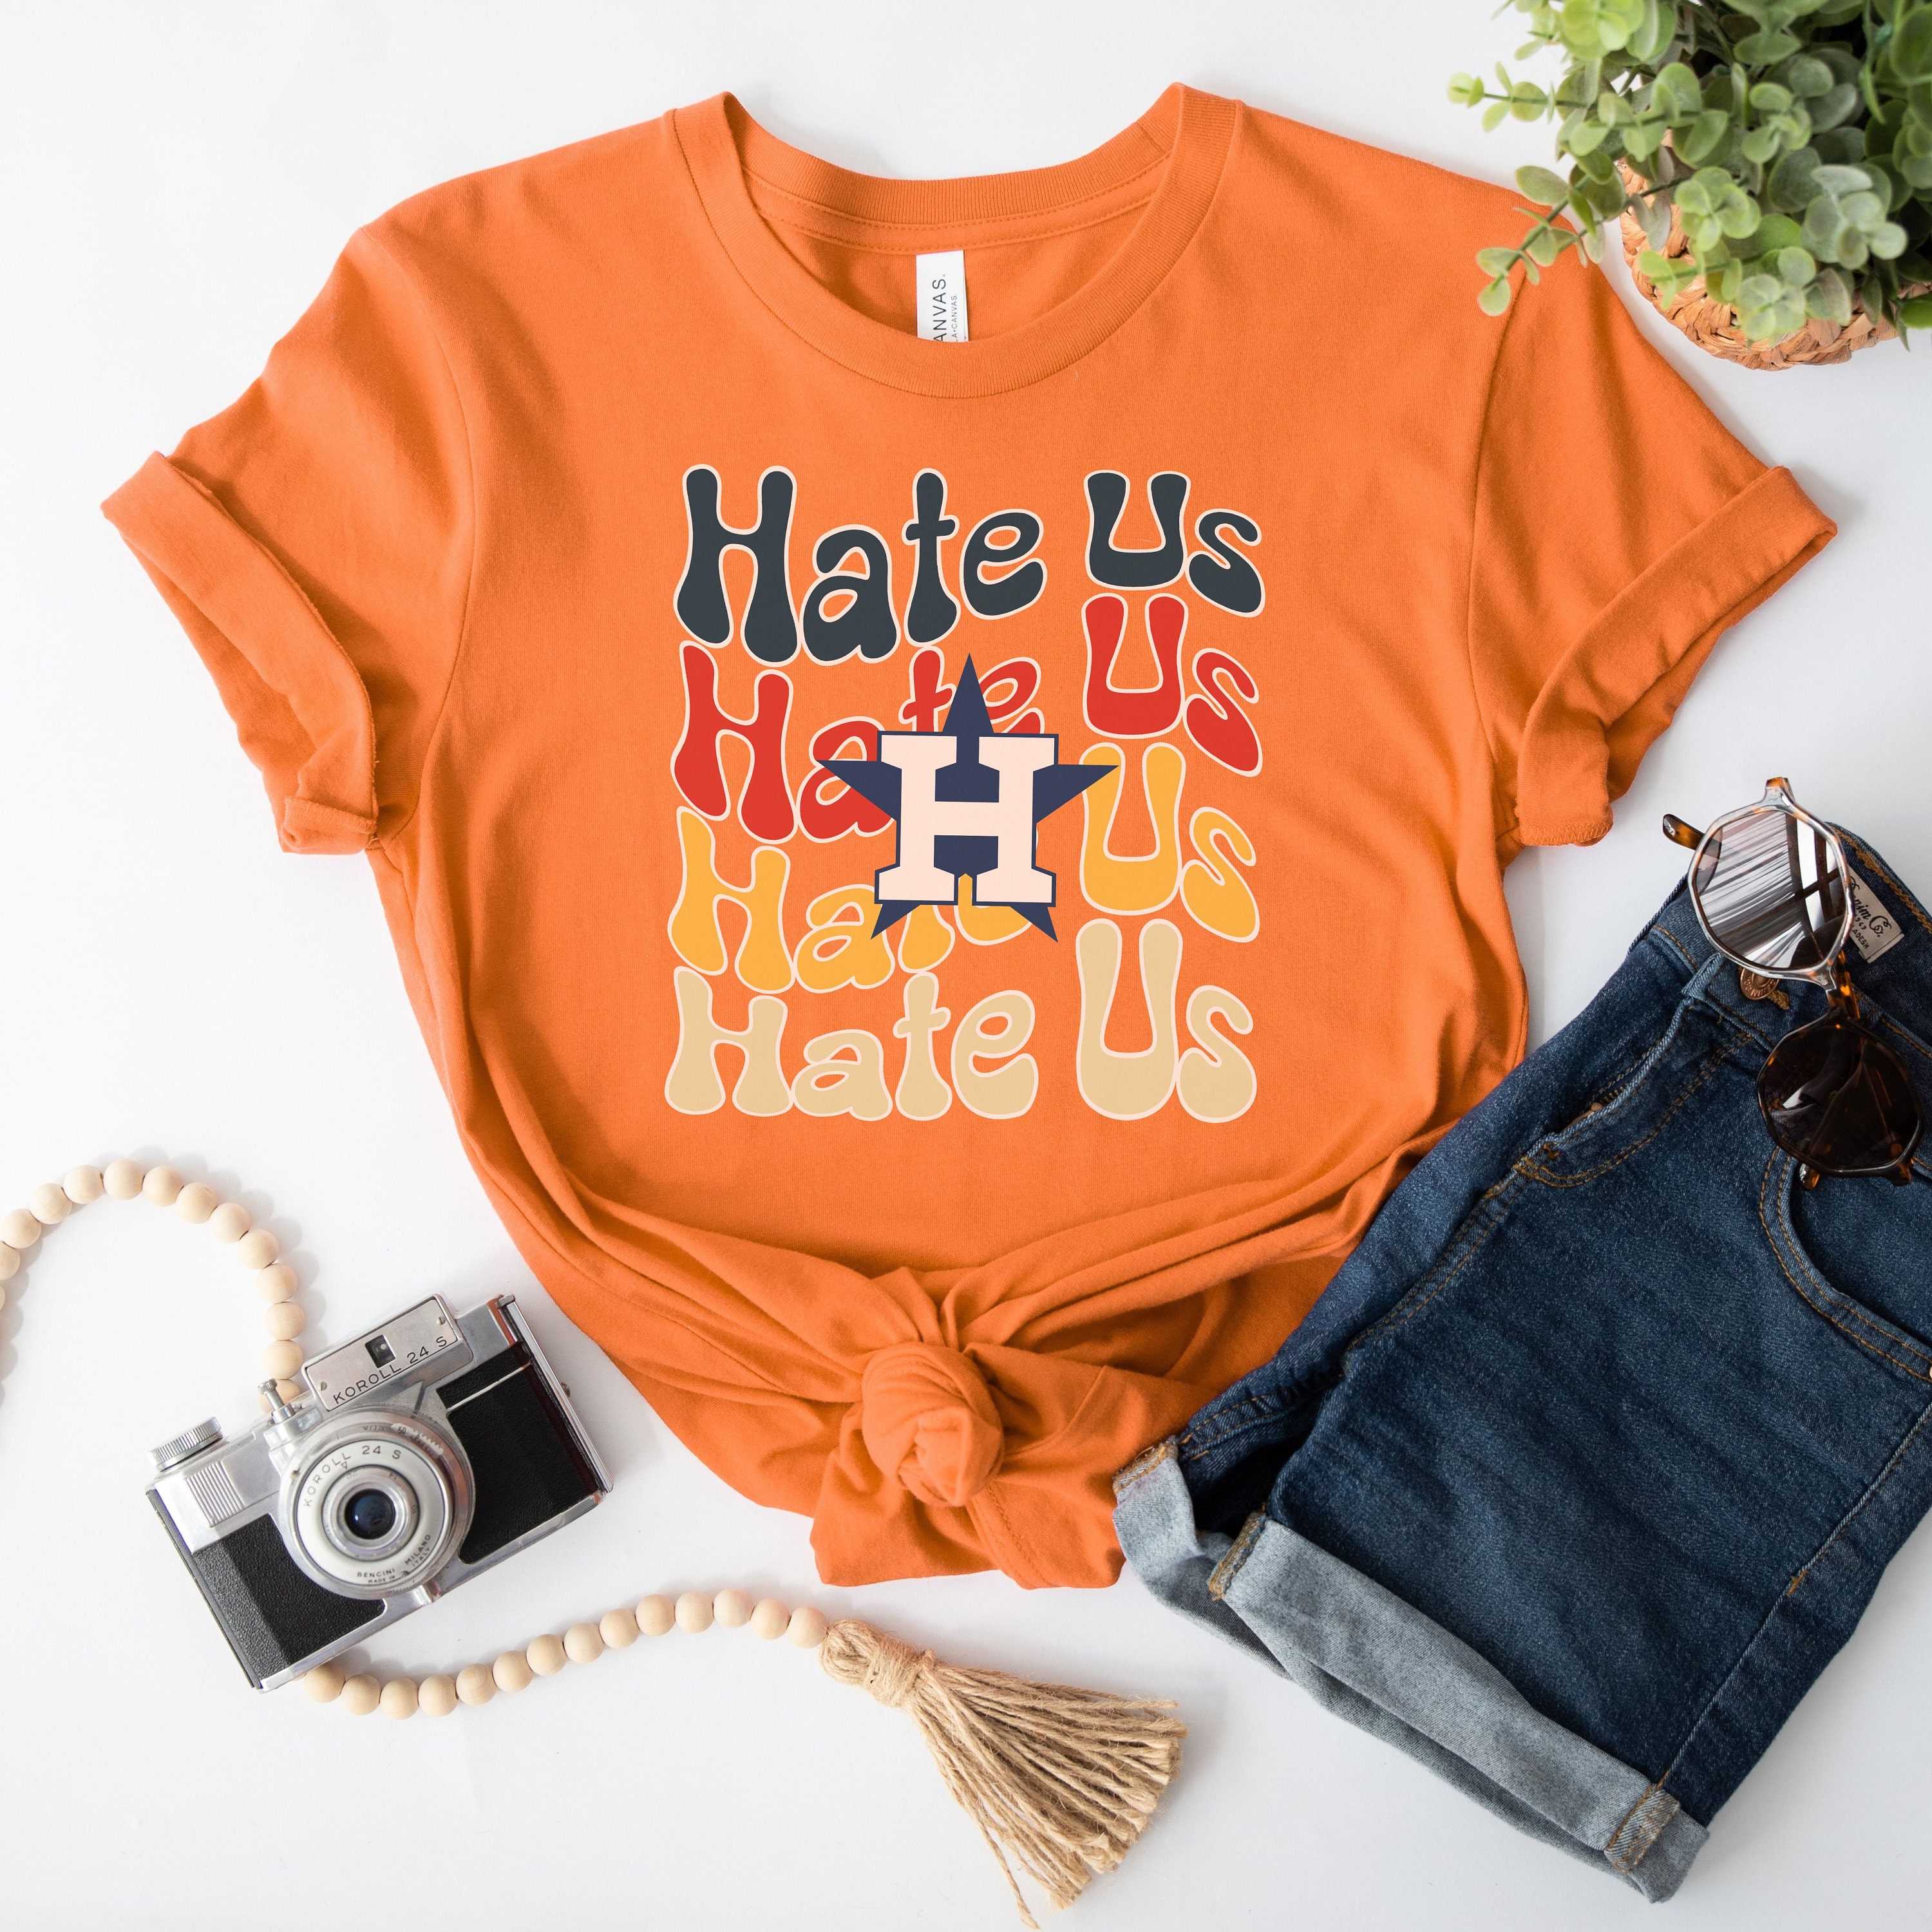 Astros Hate Us Shirt 